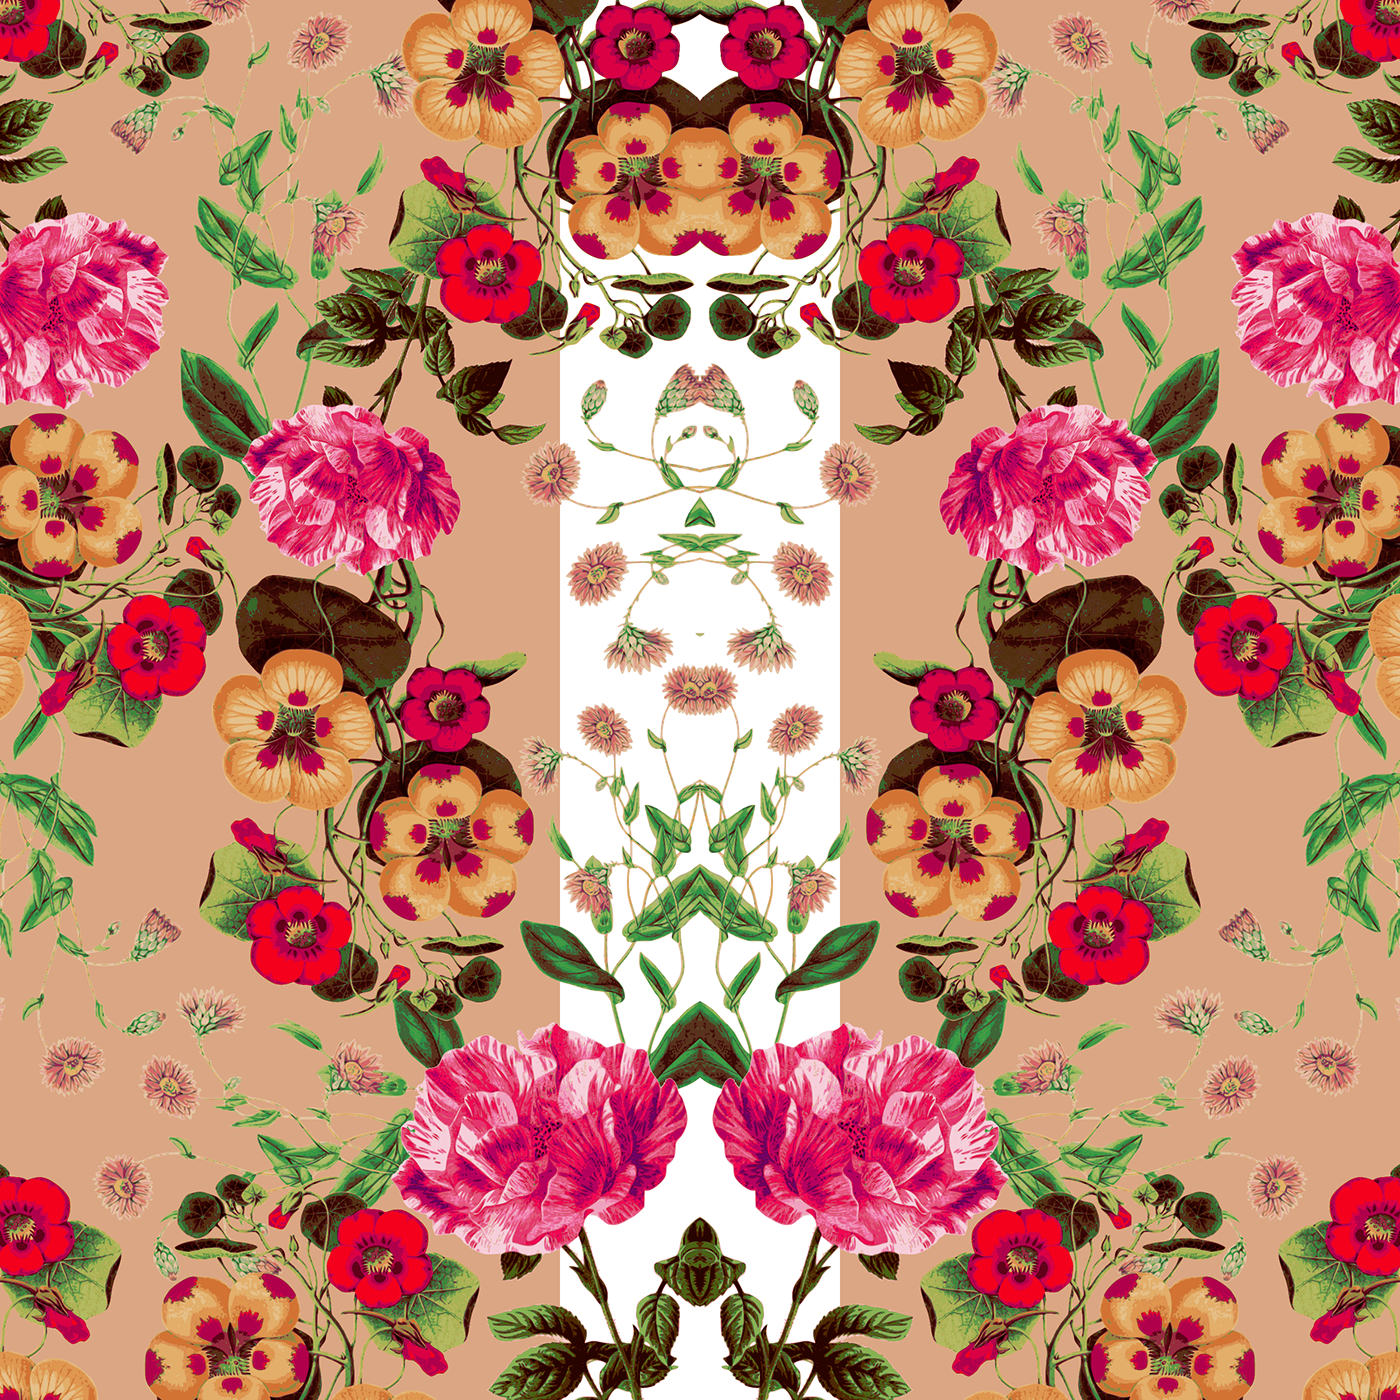 Nature abstract floral print flower power symmetric floral print Print on demand